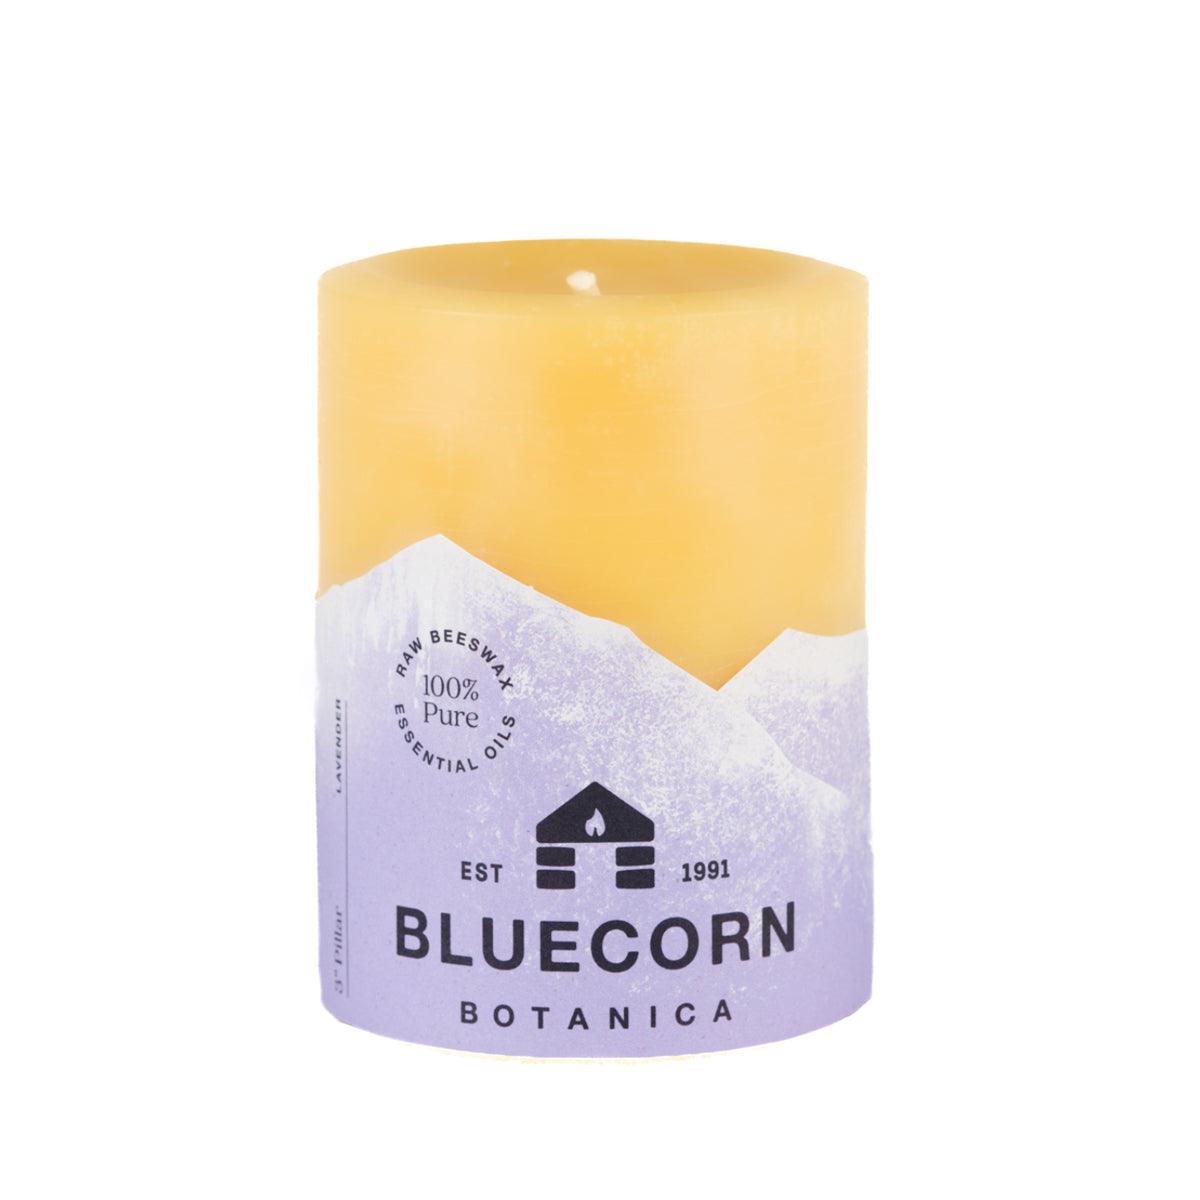 Bluecorn Botanica 100% Pure Beeswax Lavender 3" x 4" Scented Pillar Candle. Burn Time: 60 hours. Made with 100% Pure Beeswax, 100% Pure Essential Oils, and a 100% pure cotton wick, no lead. Candles are paraffin free, clean burning and non-toxic. Features Bluecorn Botanica label in purple printed on 100% recycled paper. Wax is golden in color. 